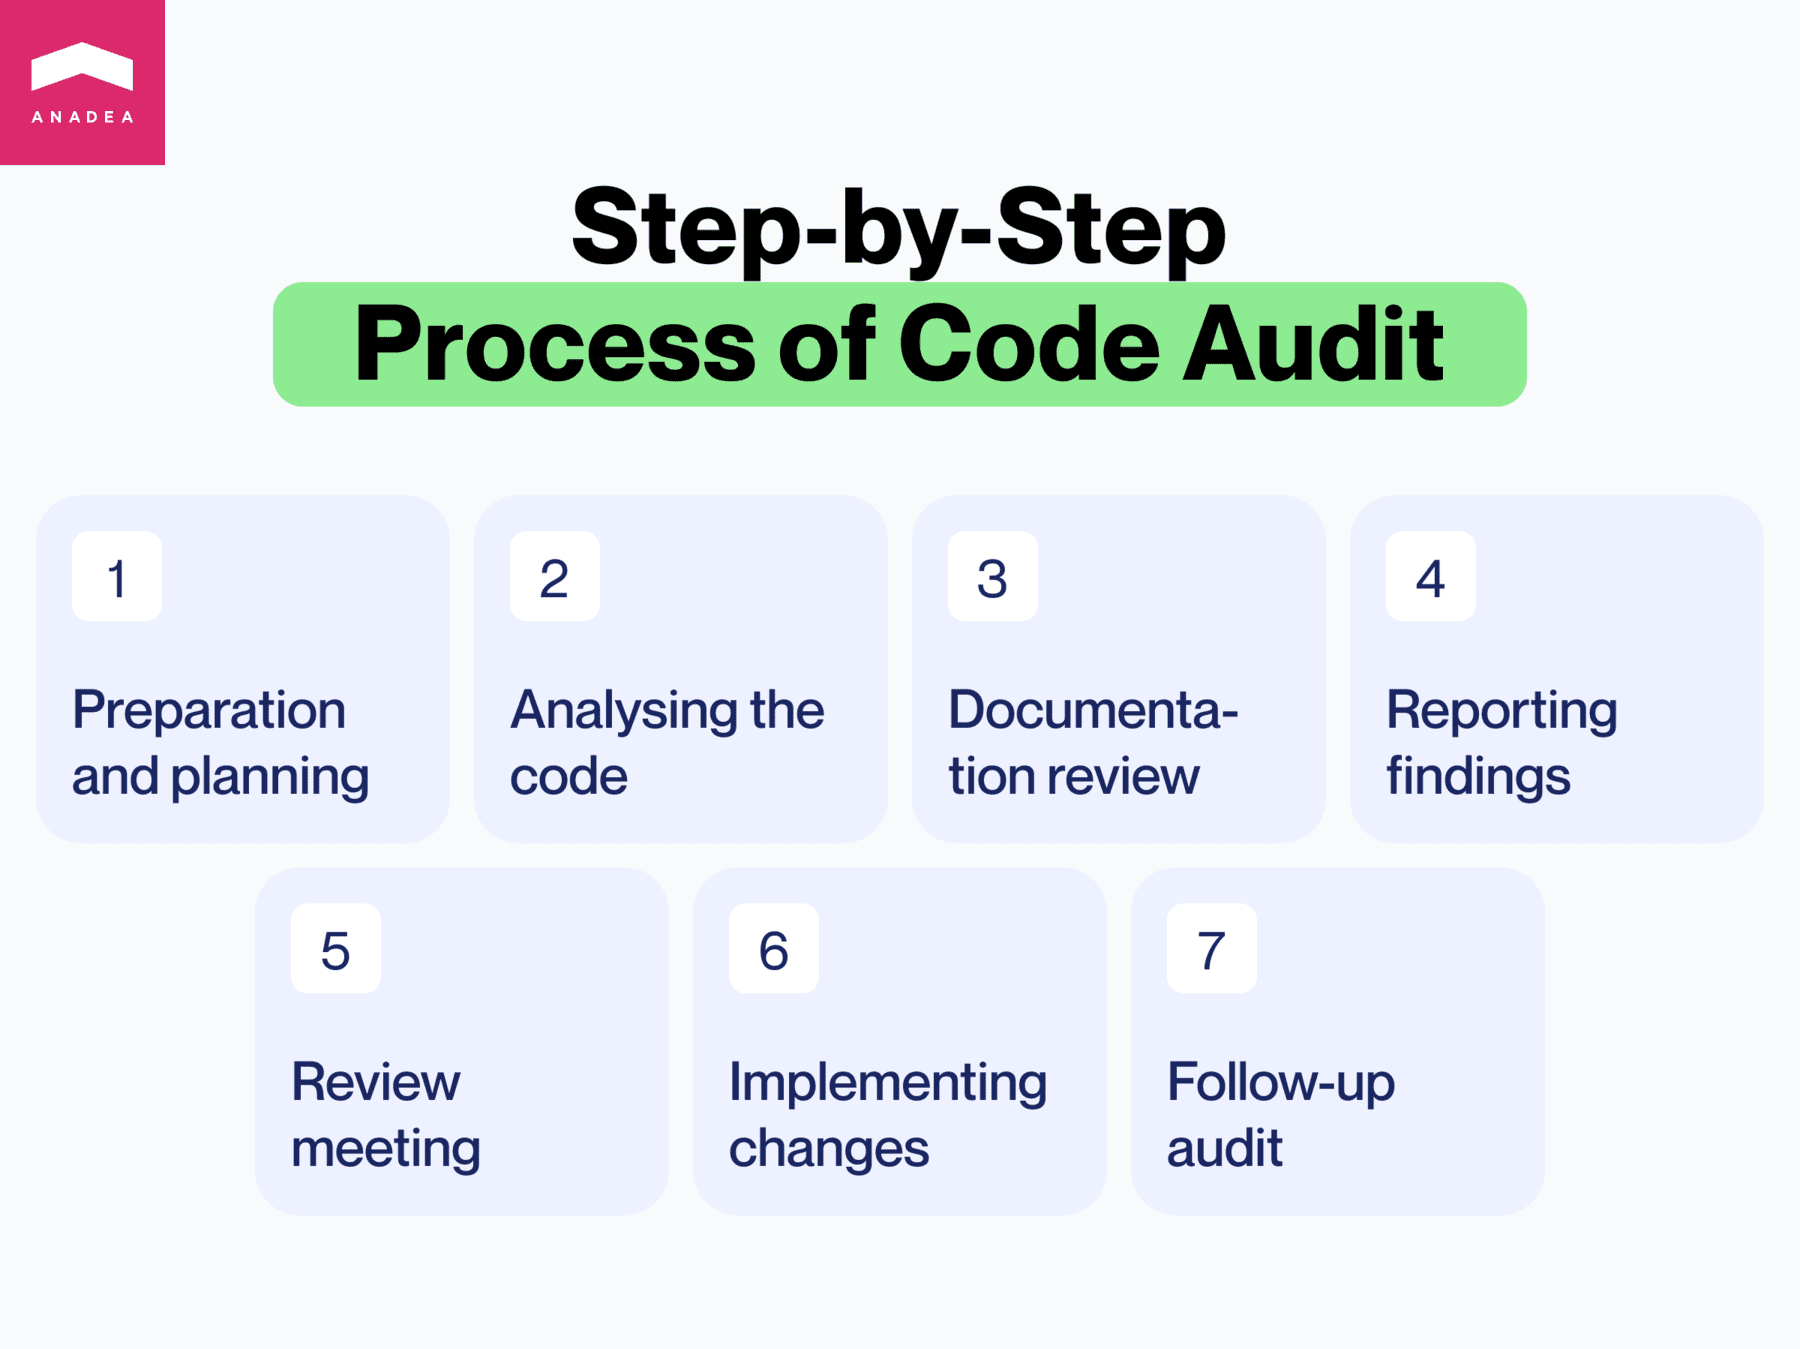 Step by step process of code audit